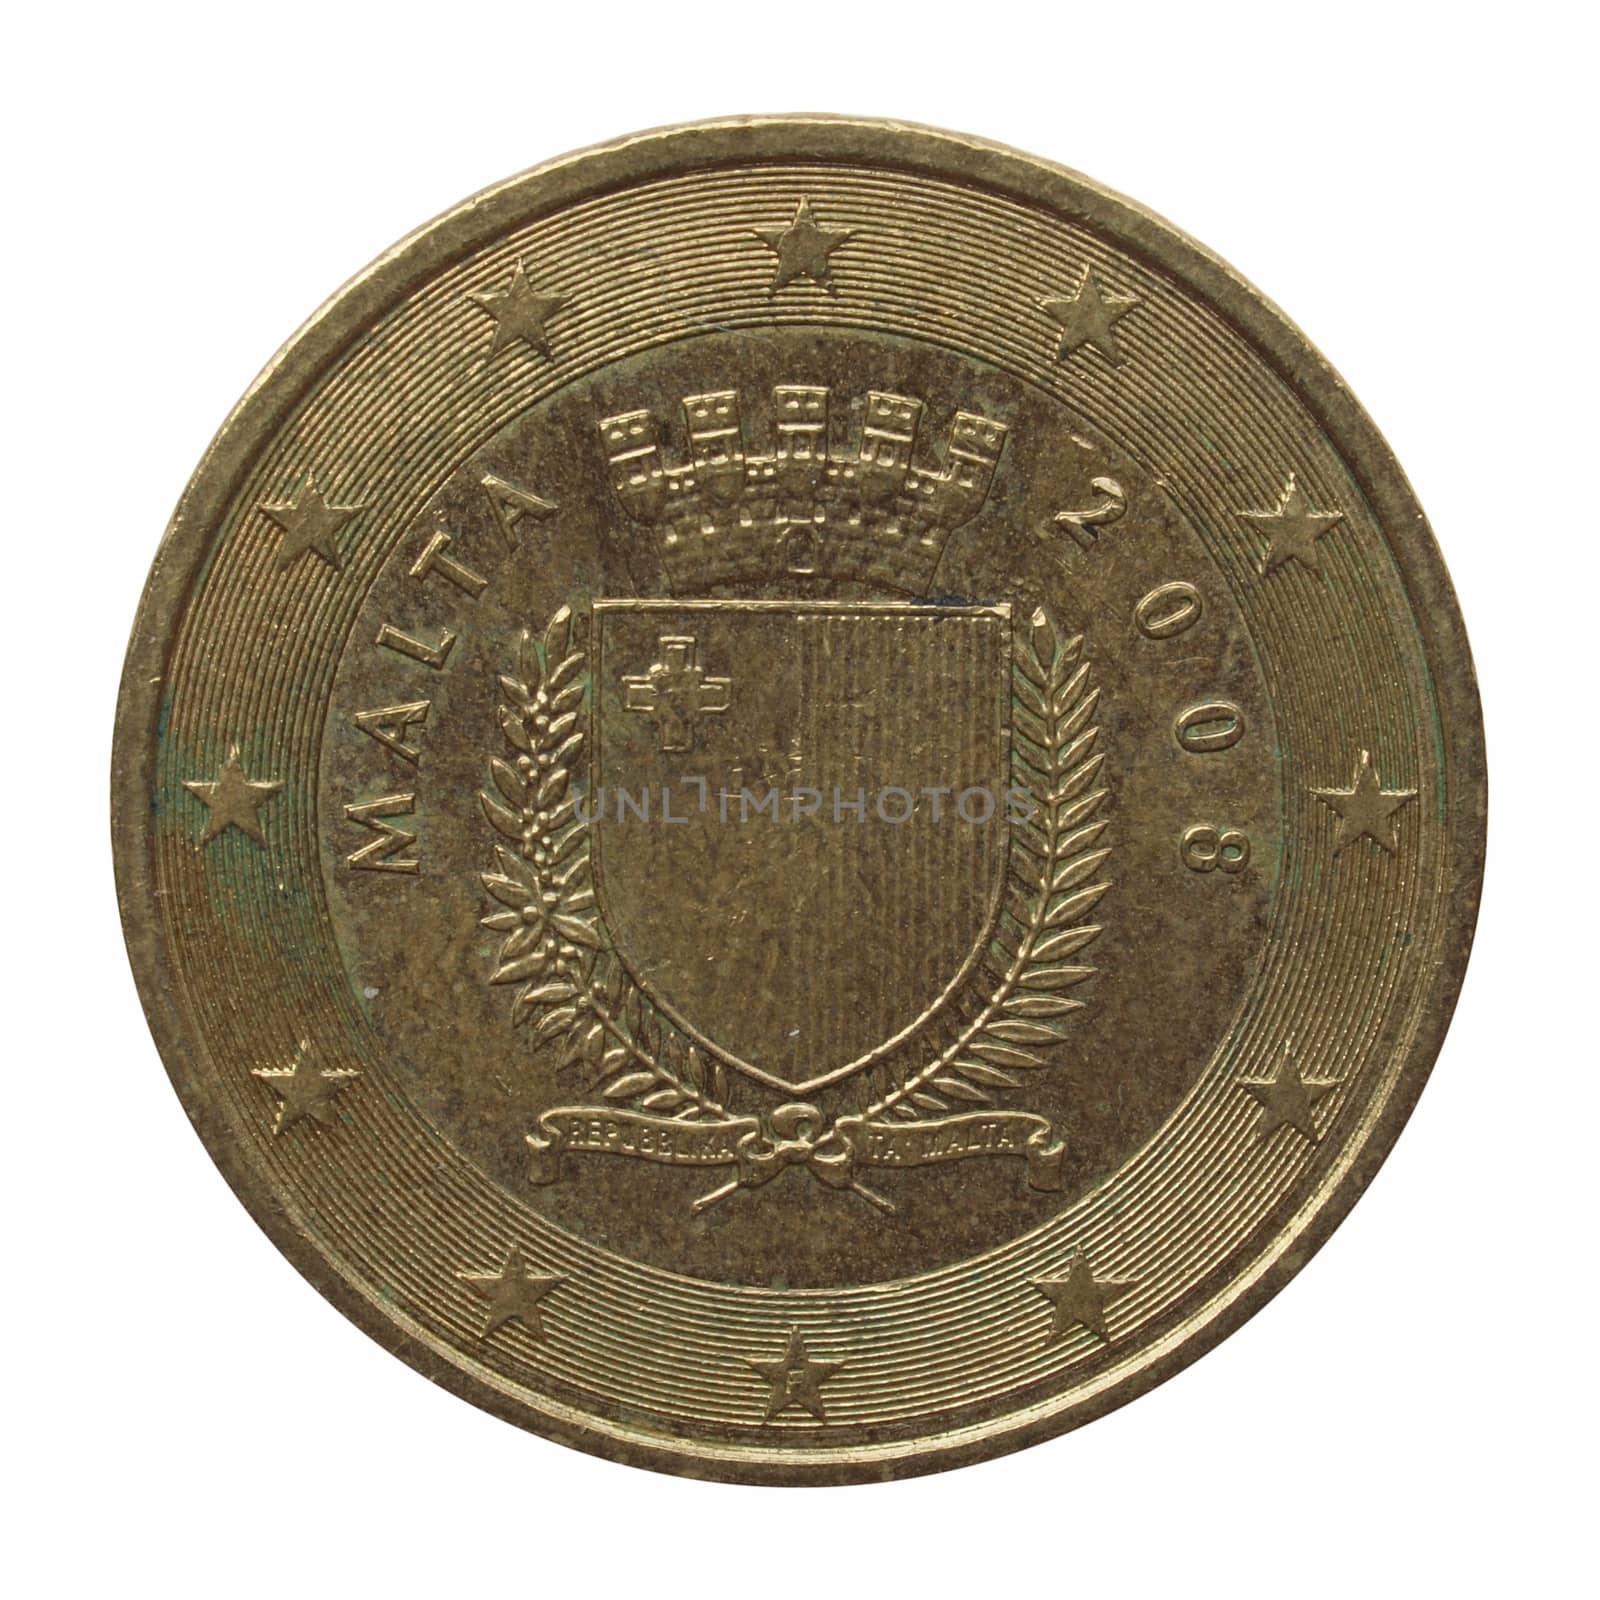 50 EUR cent coin from Malta